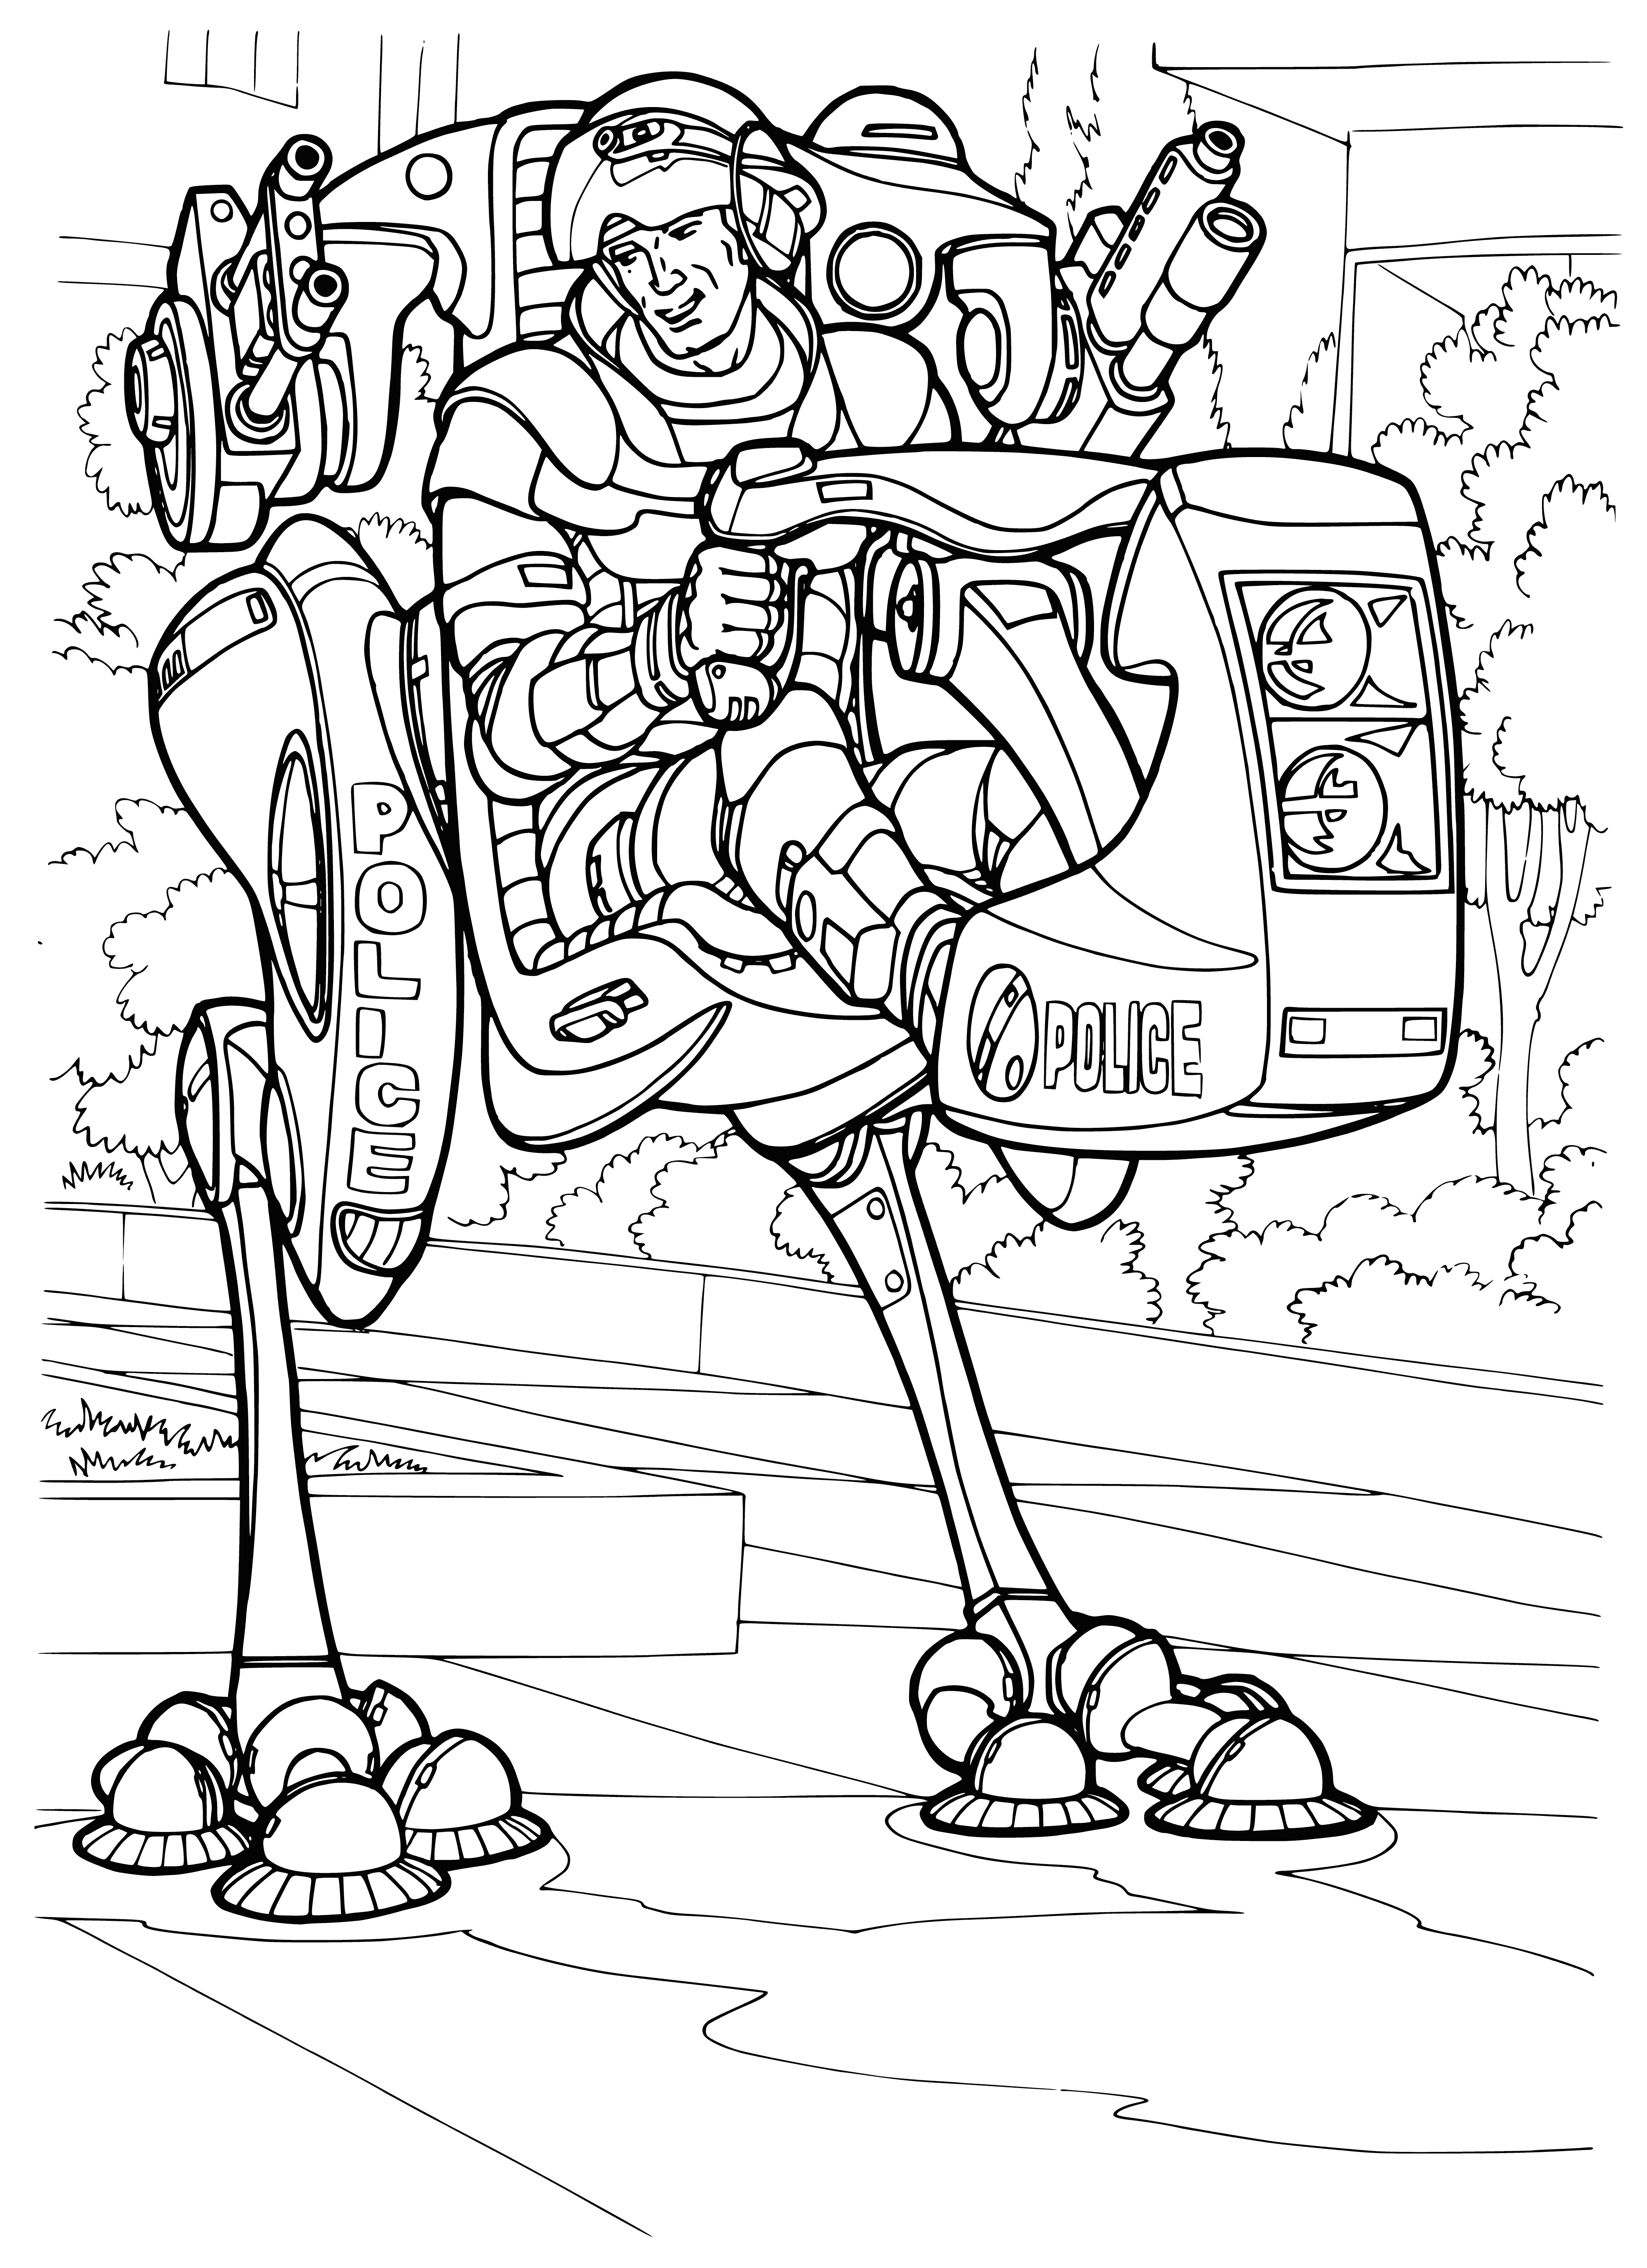 coloring page: Future cities to have advanced tech & walking police with high-tech suits that allow them to walk walls and ceilings & use gadgets like grappling hooks & lines.